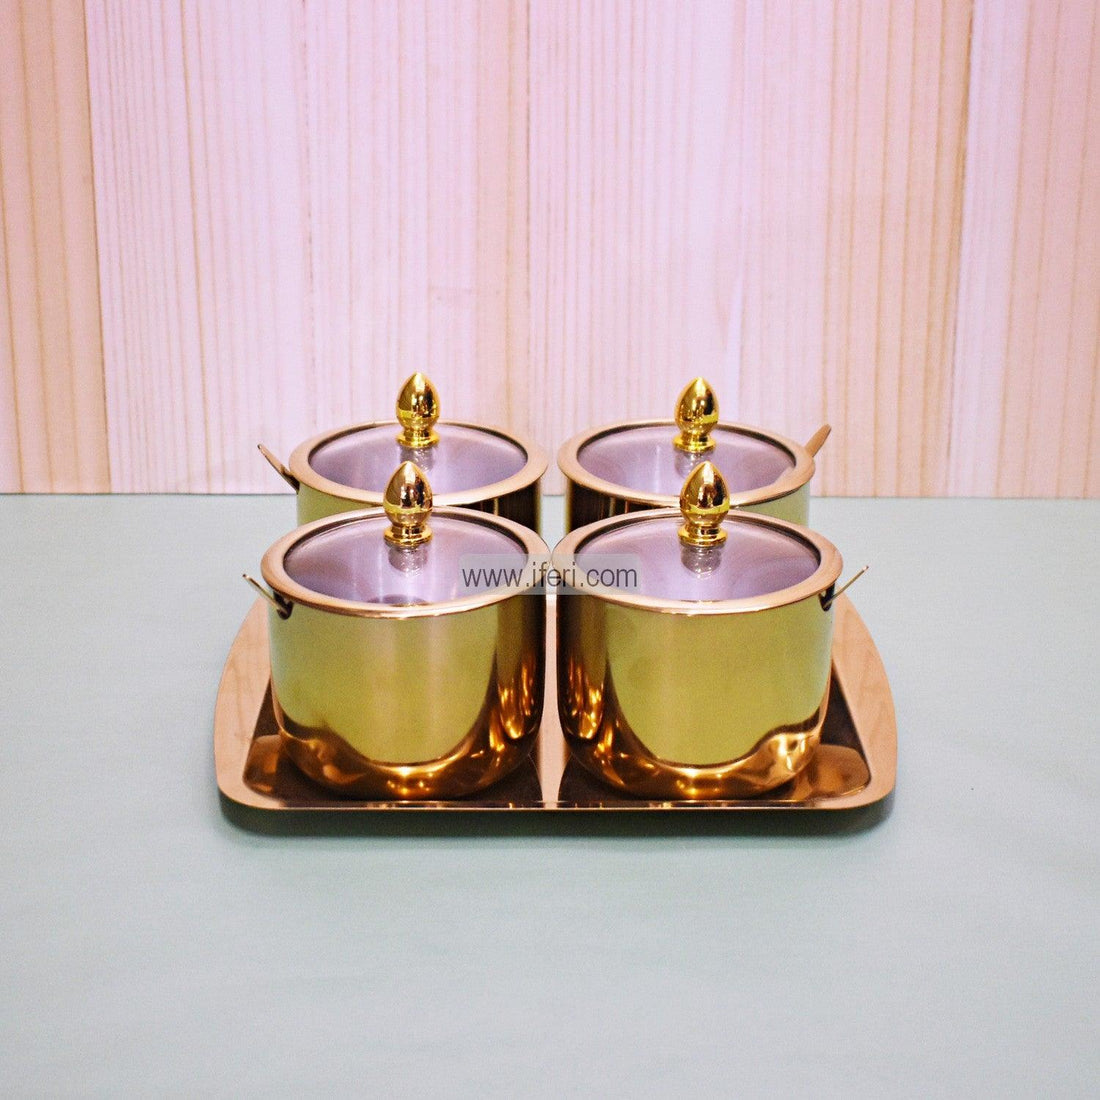 4 Pcs Stainless Steel Spice Jar with Tray FH0780 Price in Bangladesh - iferi.com